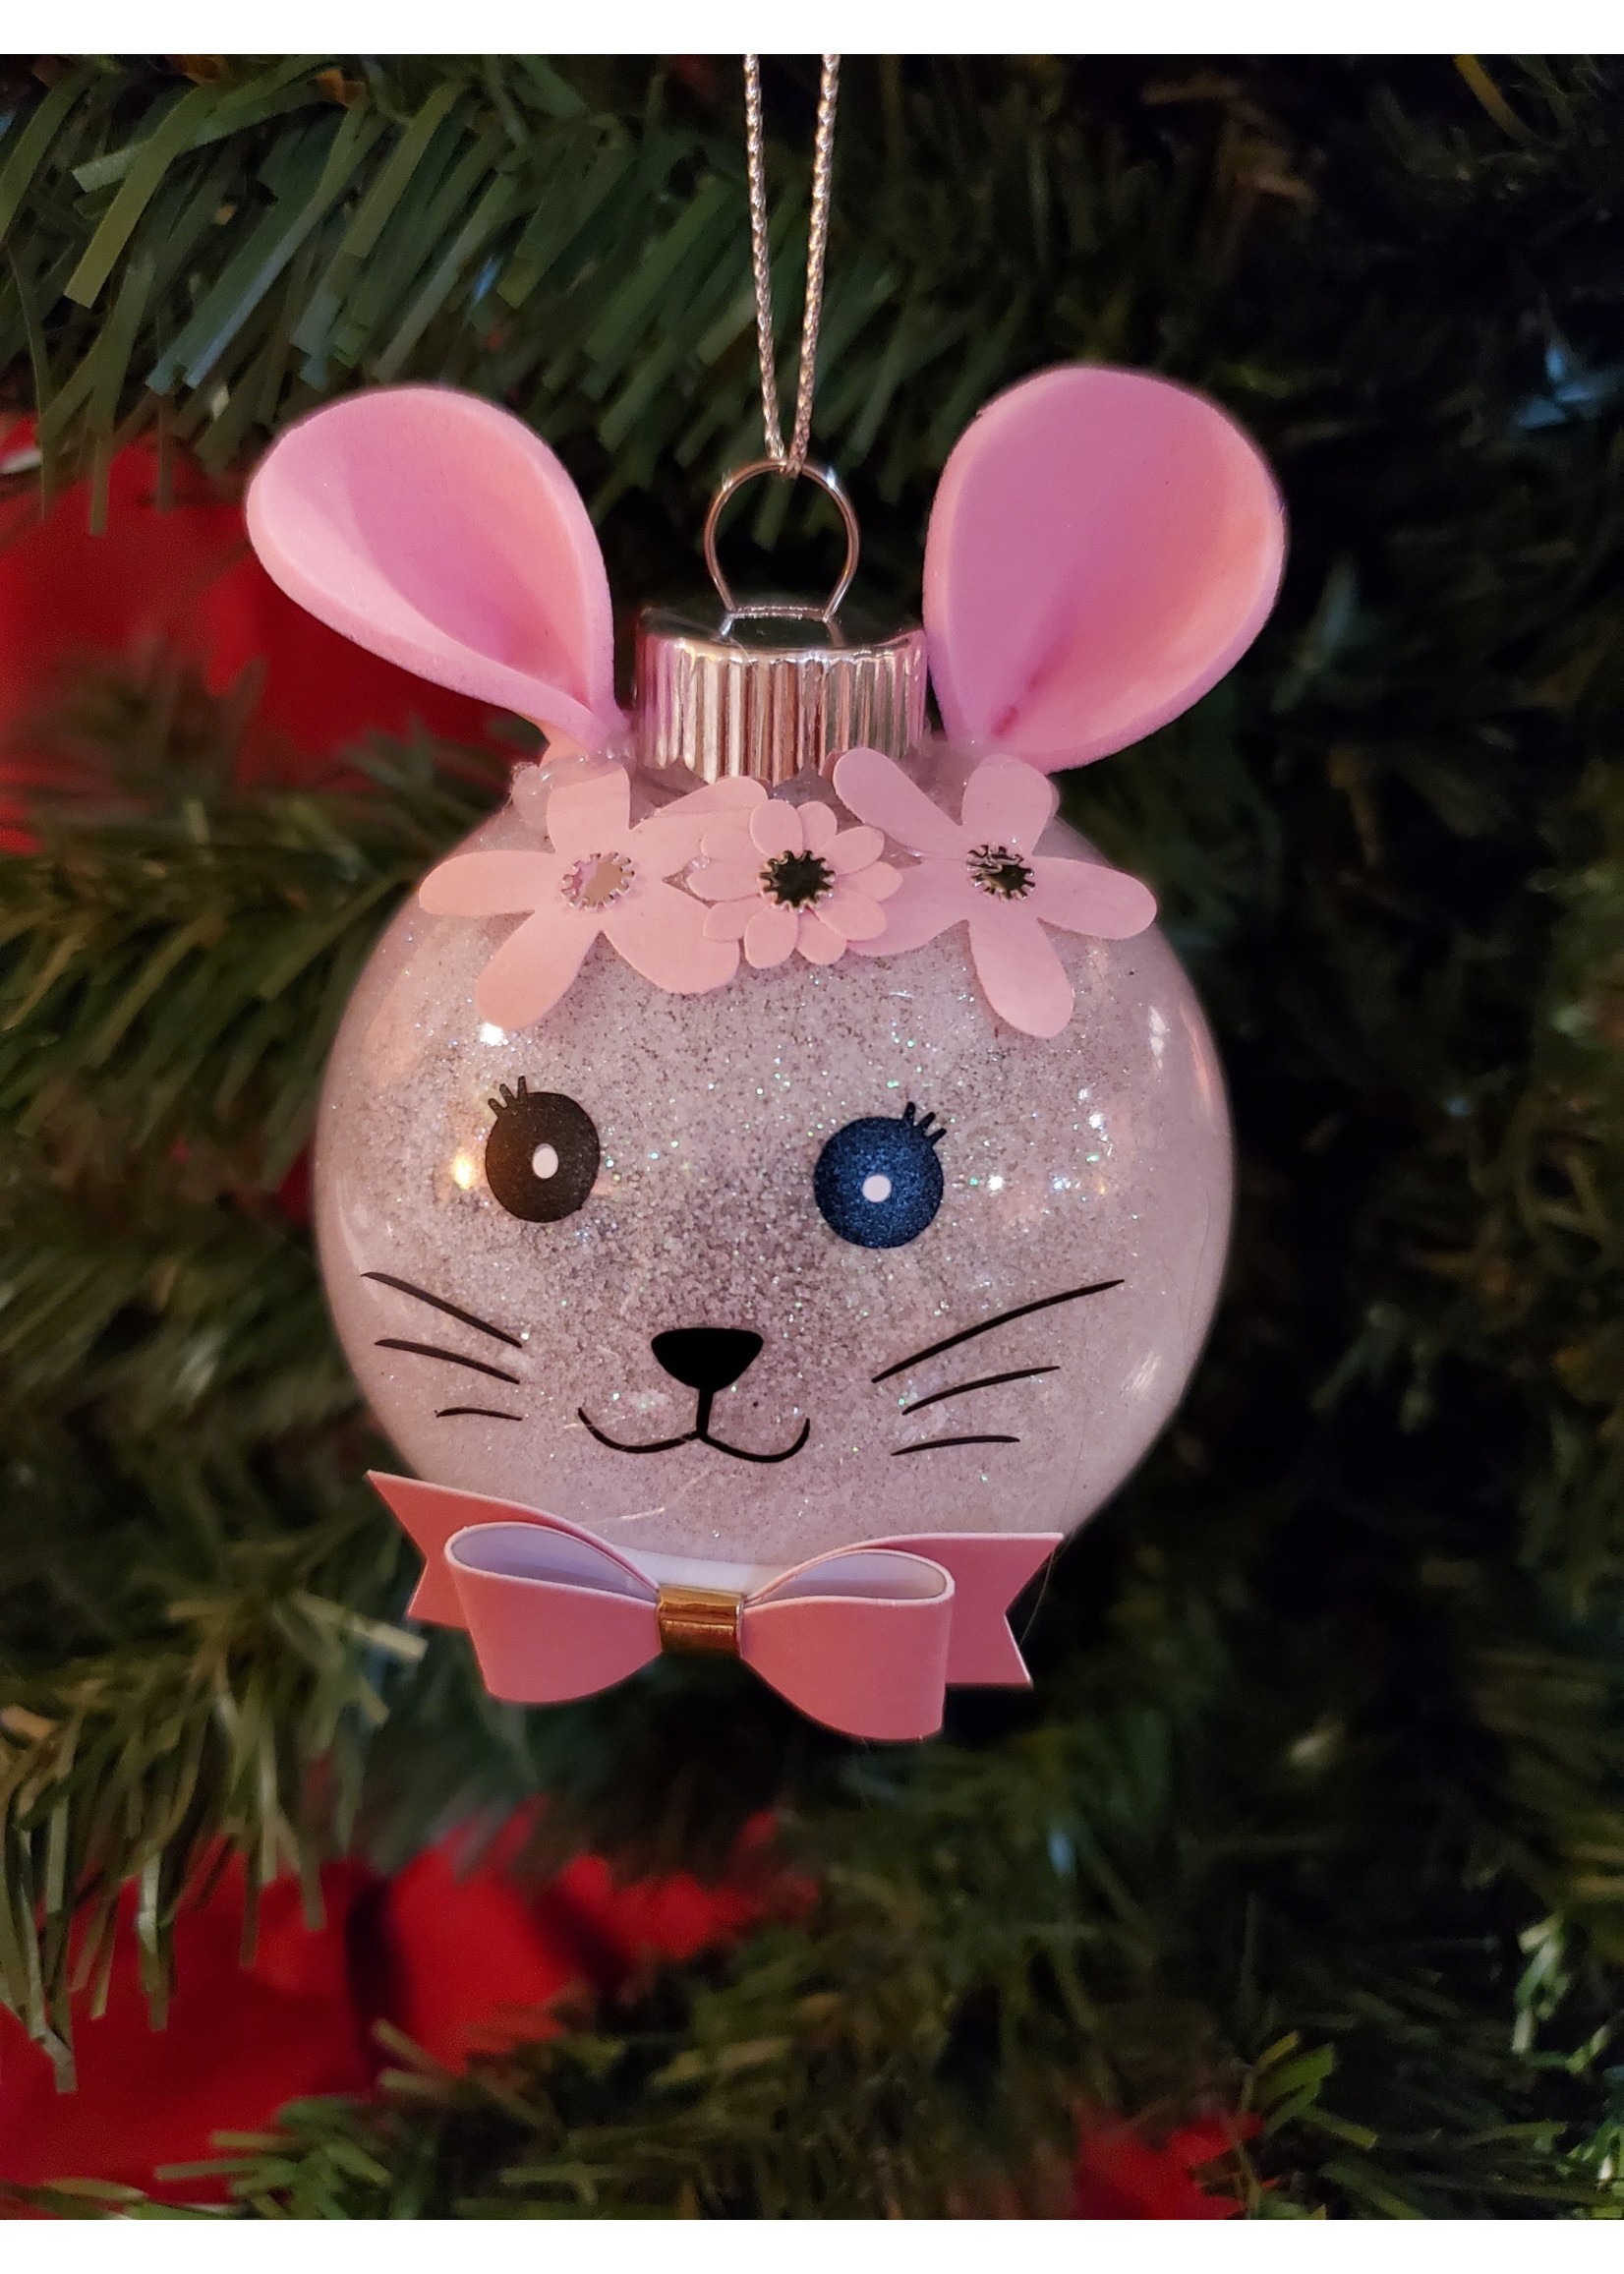 Sally Ward Ornament clear plastic 2.65in-Light Pink Glitter Mouse w Pink Flowers/Bowtie